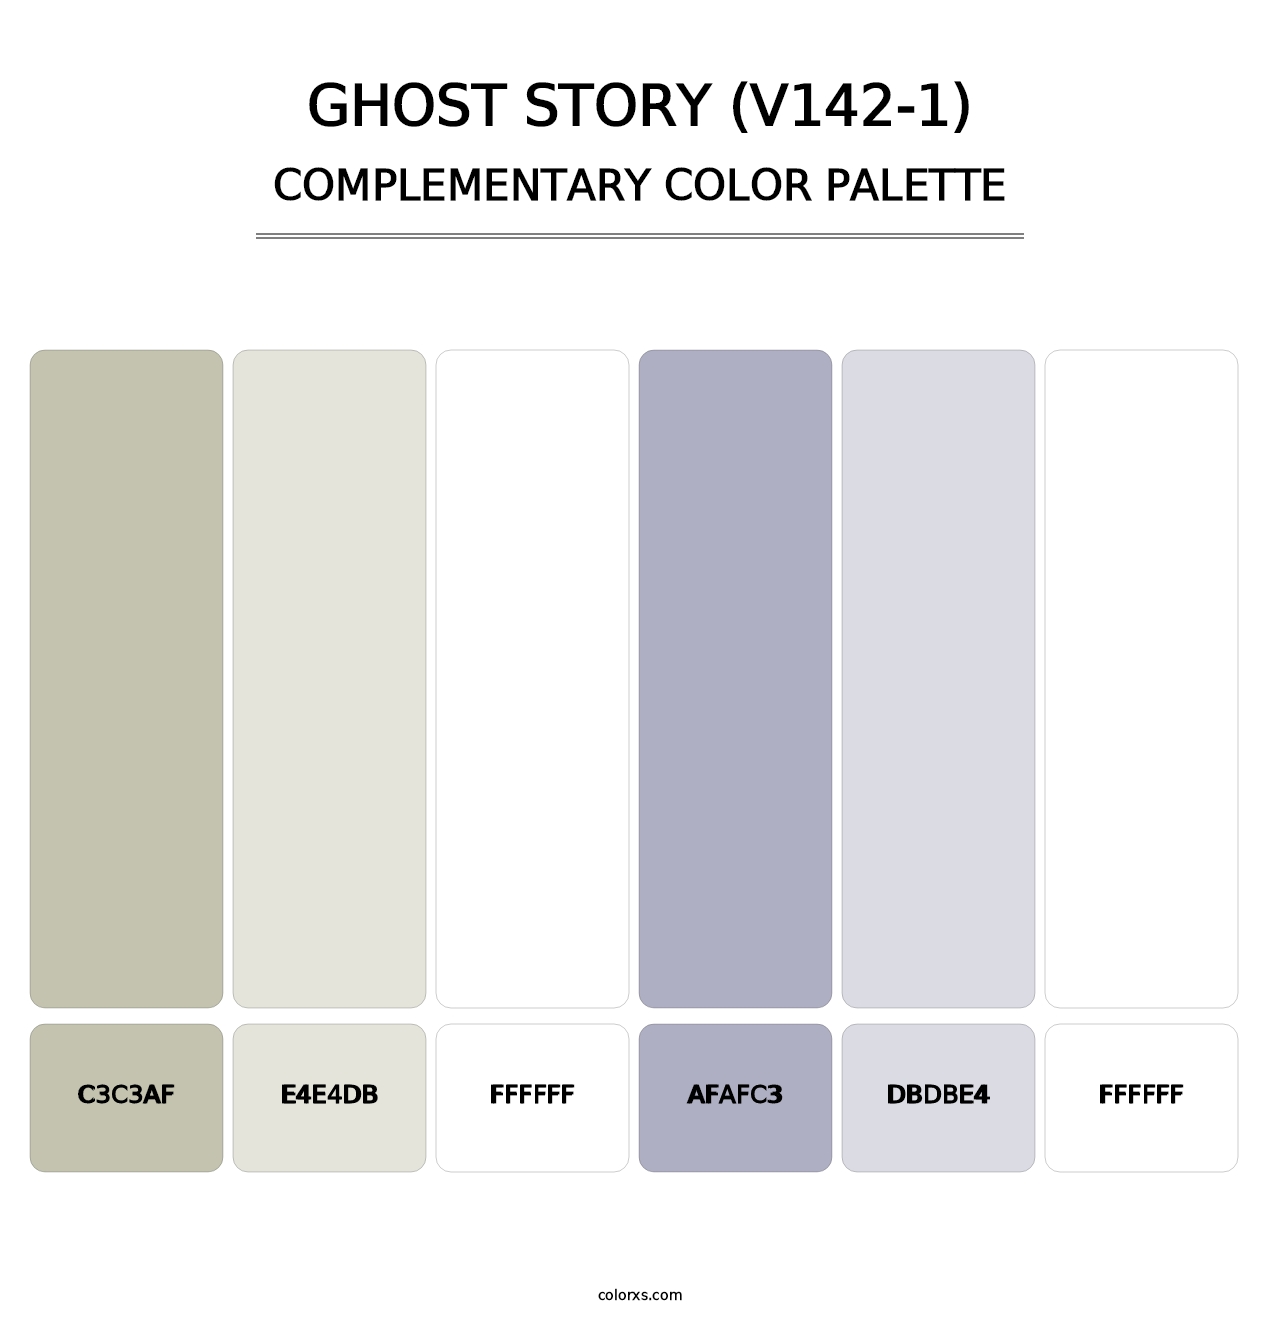 Ghost Story (V142-1) - Complementary Color Palette